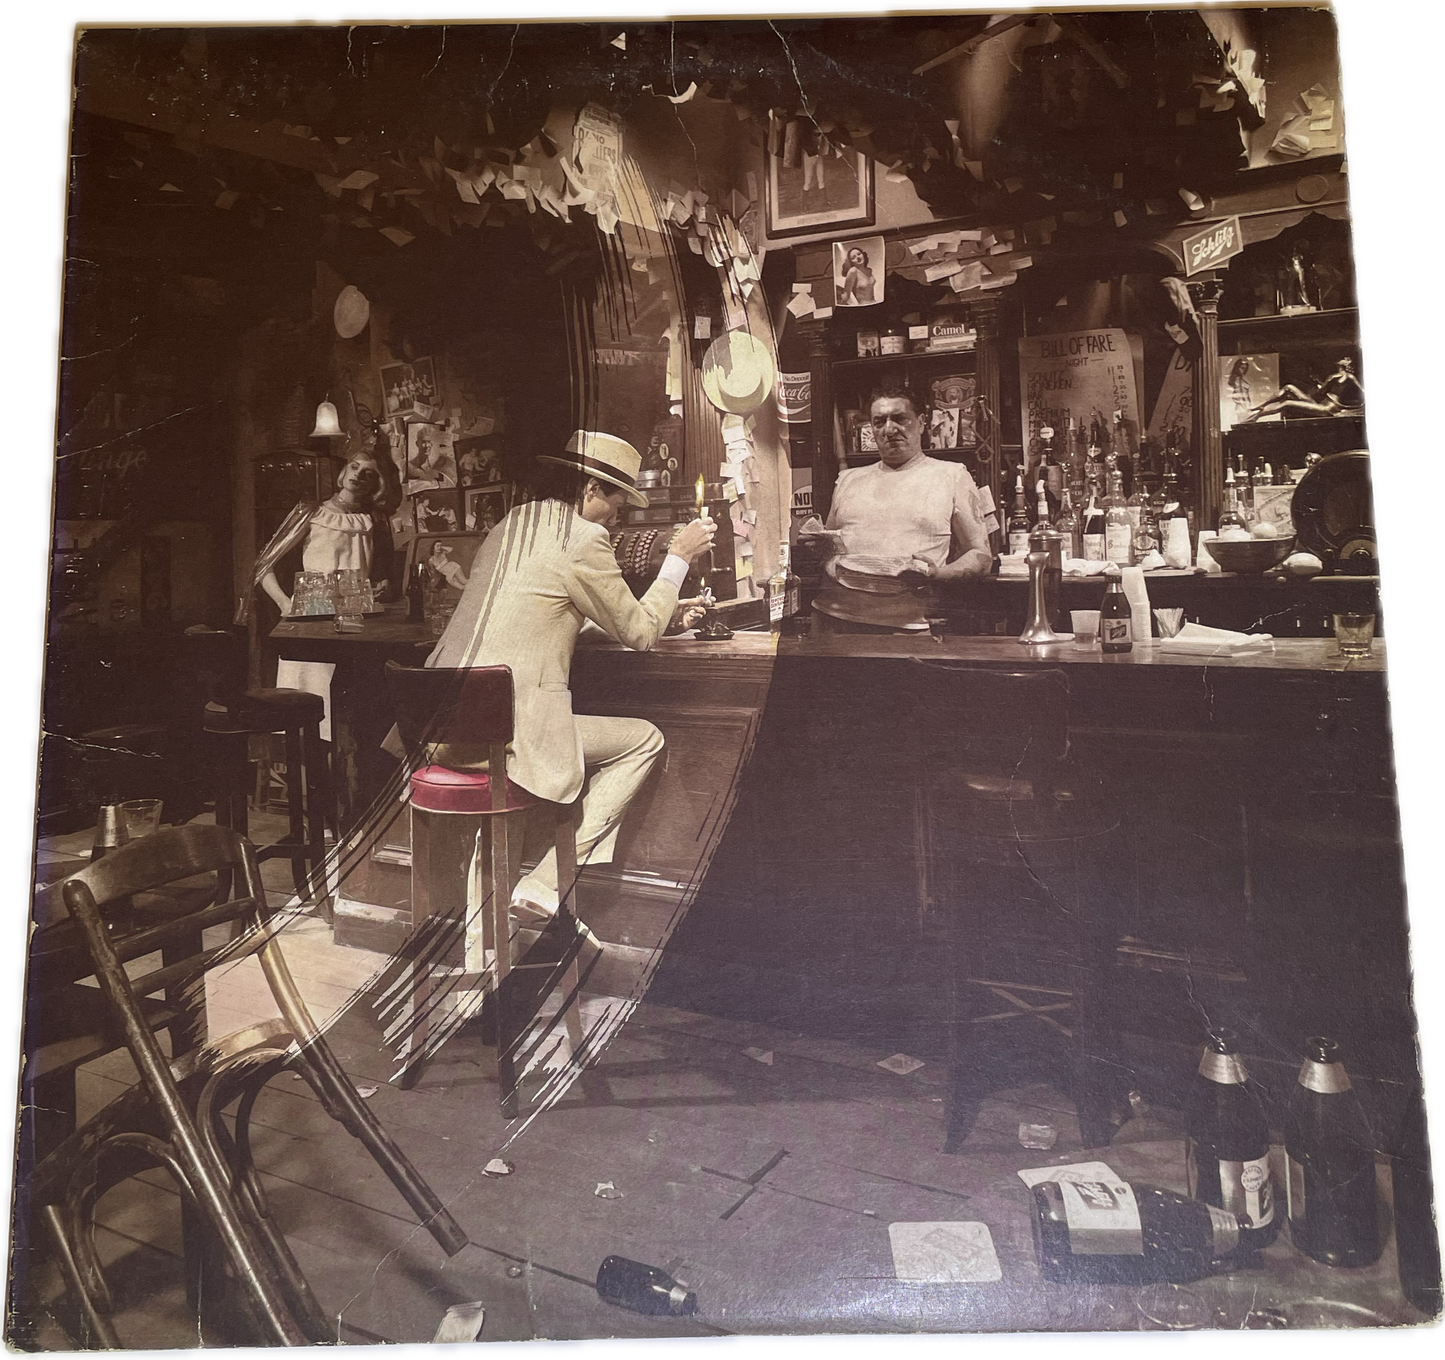 VG VG Led Zeppelin - In Through The Out Door 1979 Vinyl LP COVER